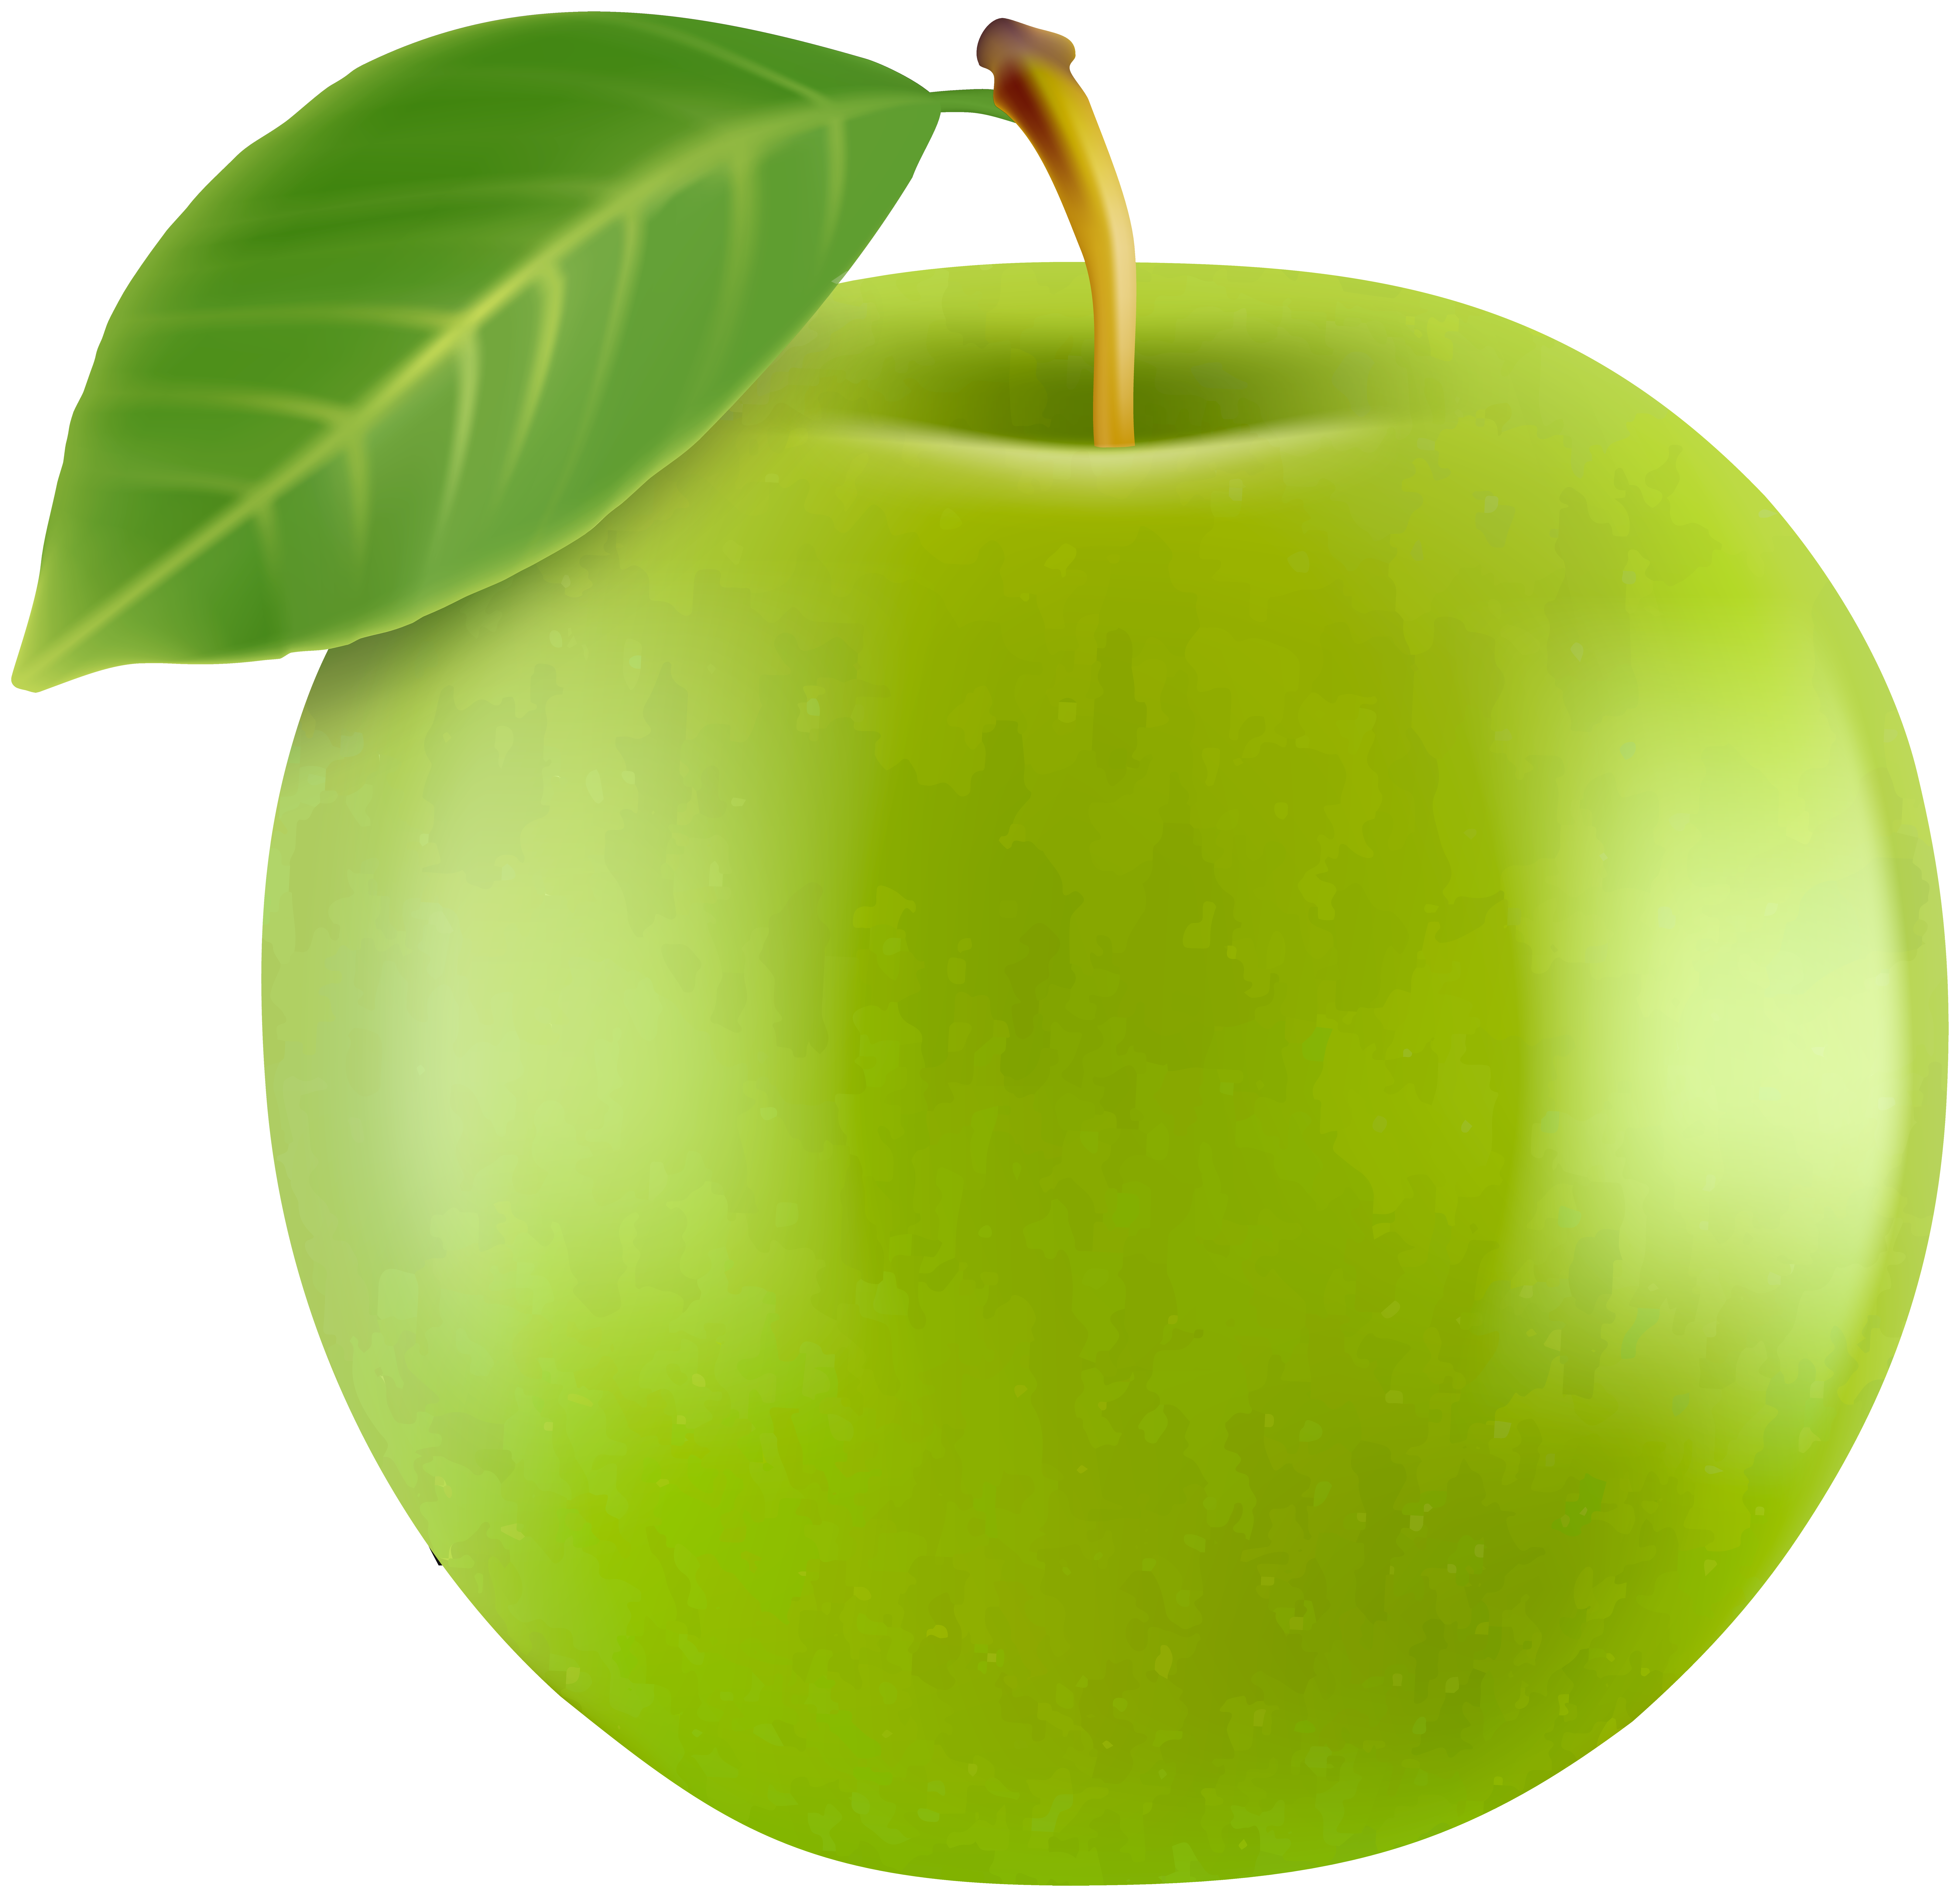 Realistic Green Apple PNG Clipart.